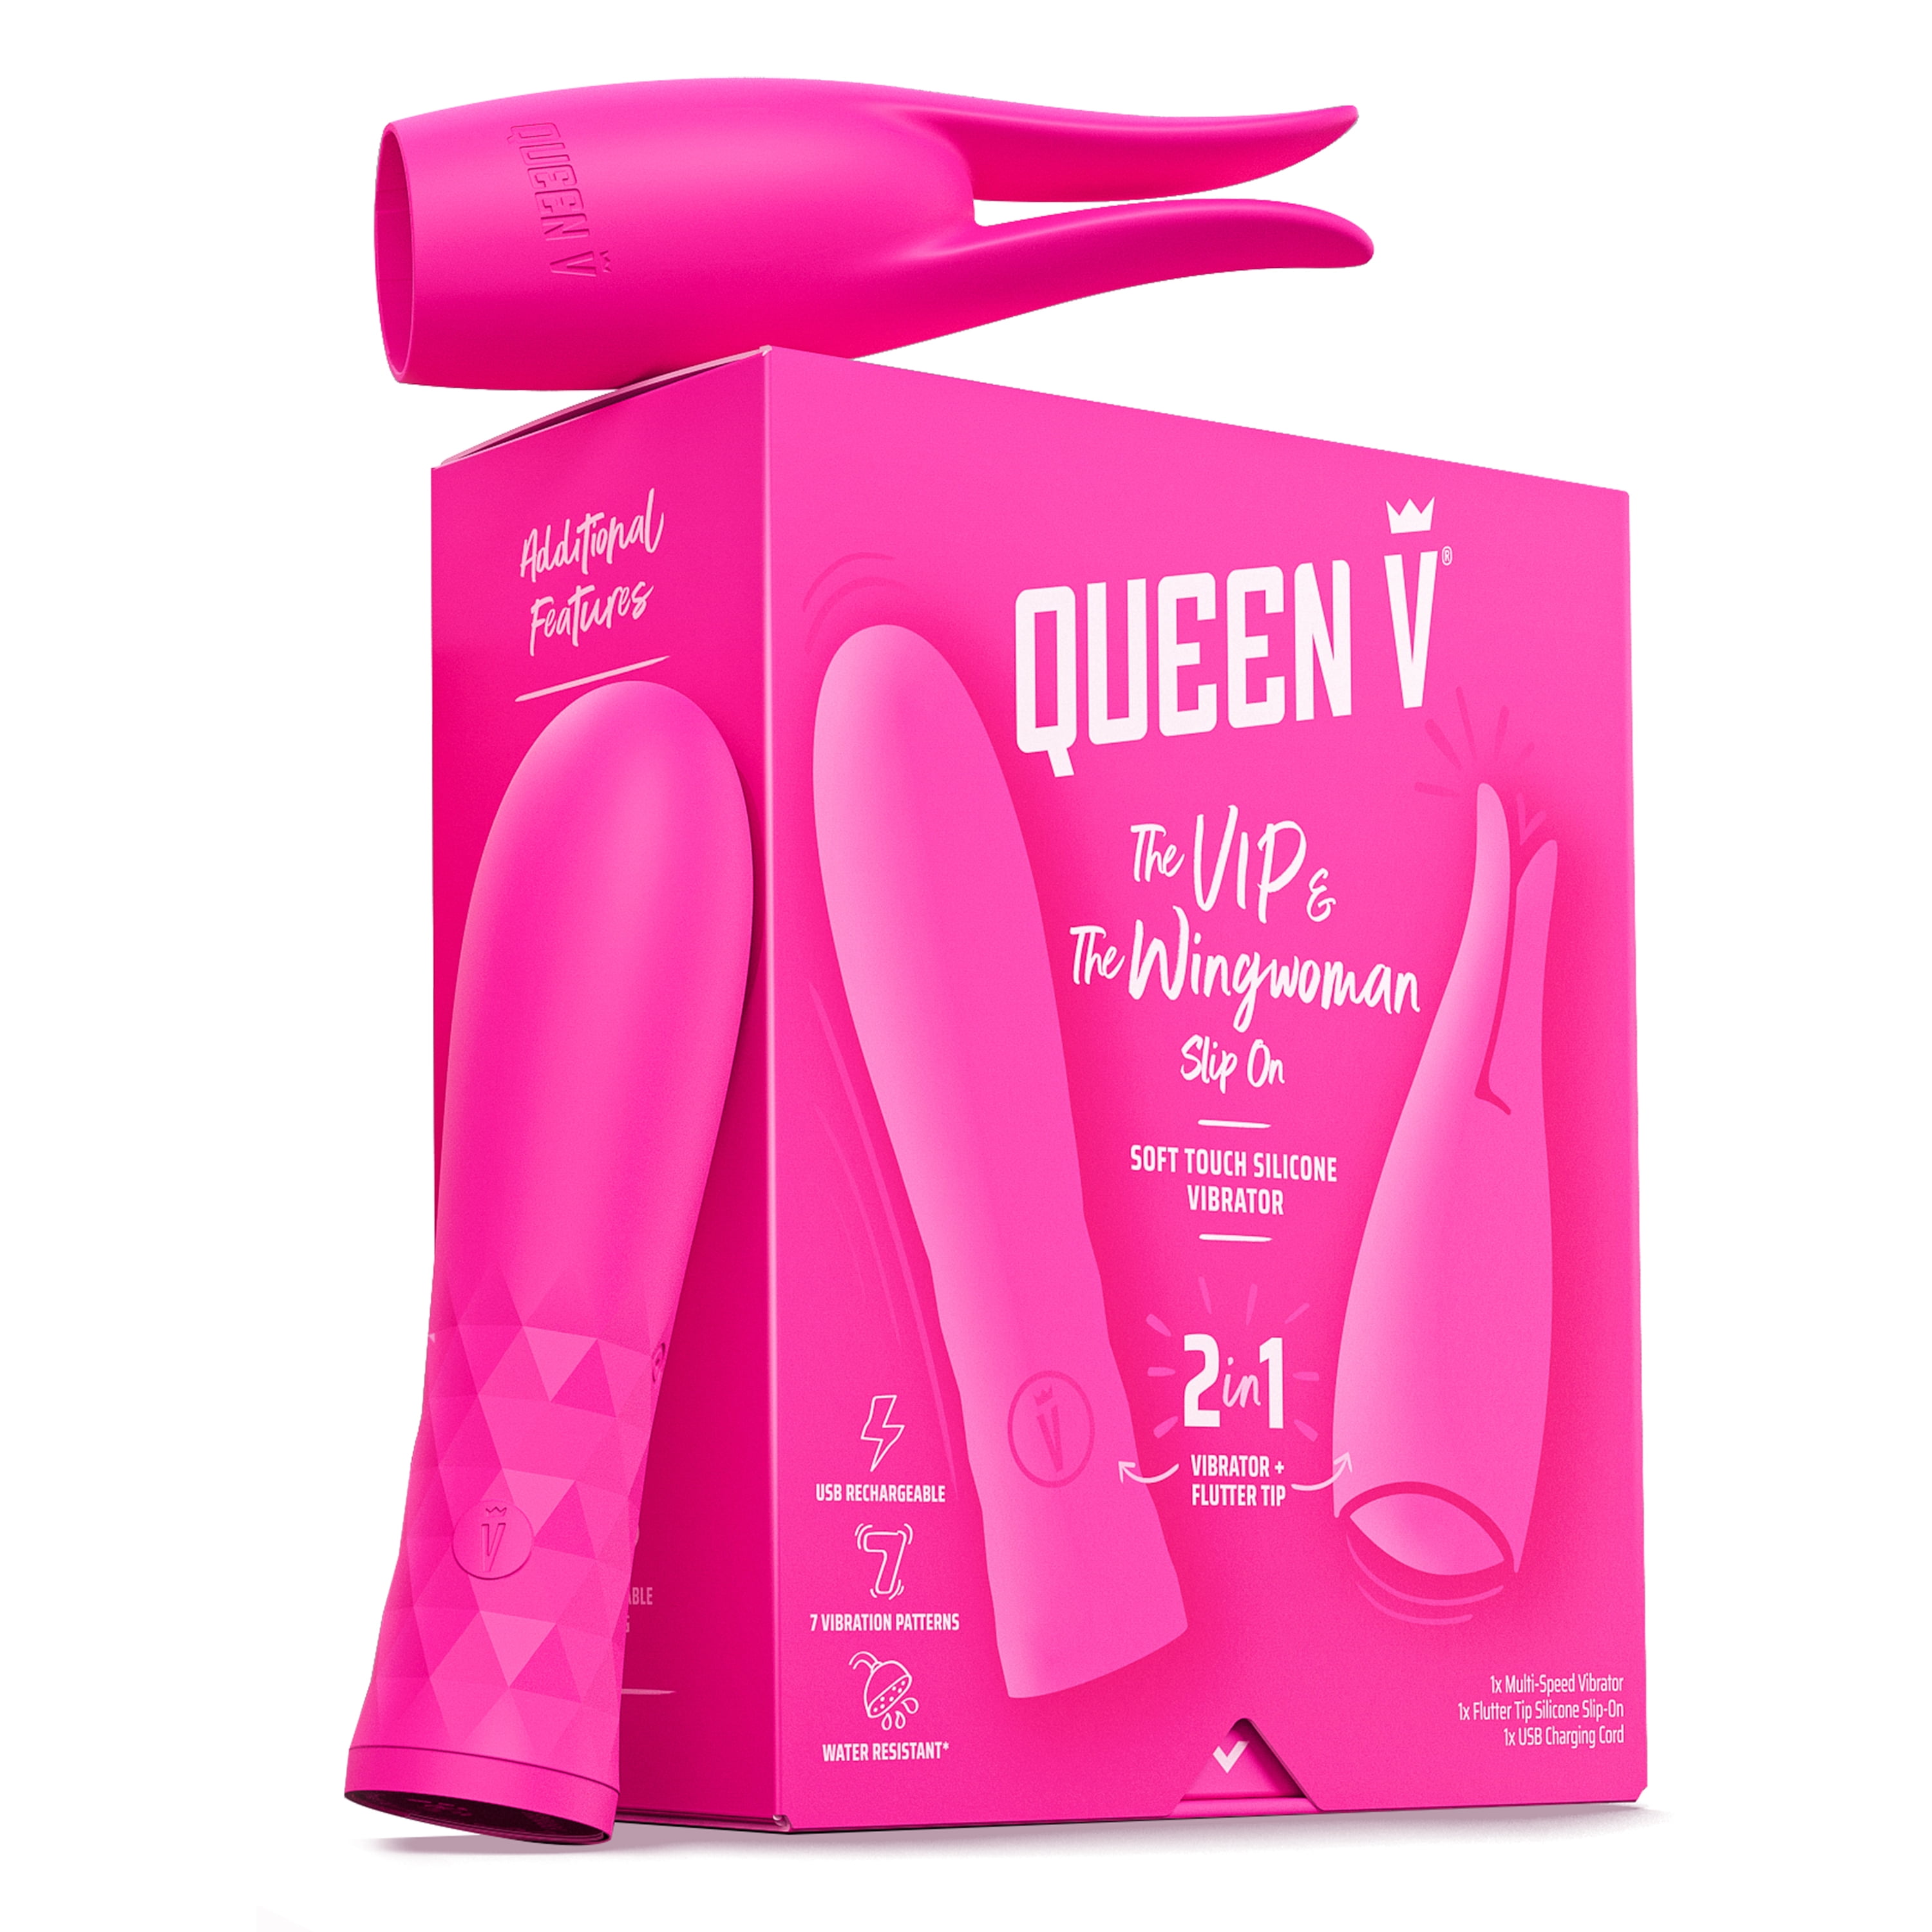 Queen V The VIP and The Wingwoman Slip On, Adult Sex Toy for Woman, 2 in 1 Multi-Speed Vibrator + Flutter Tip Slip On, USB Rechargeable, Water Resistant, Soft Touch Silicone Personal pic